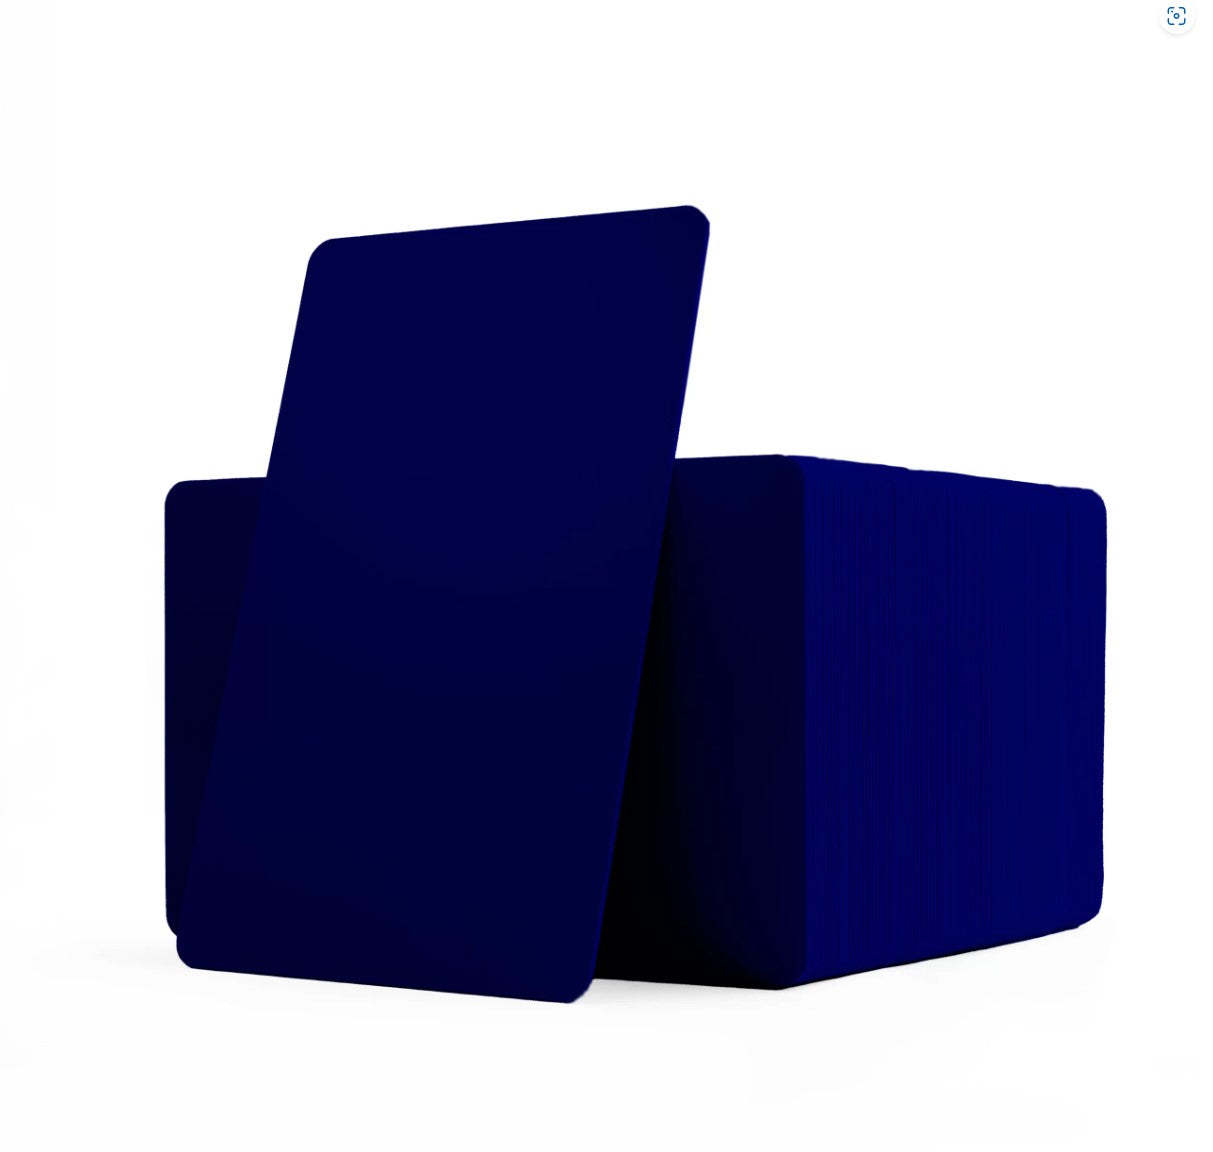 PVC CR80 Dark Blue Coloured Cards With Solid Core Coloured Edges - 1 - 100